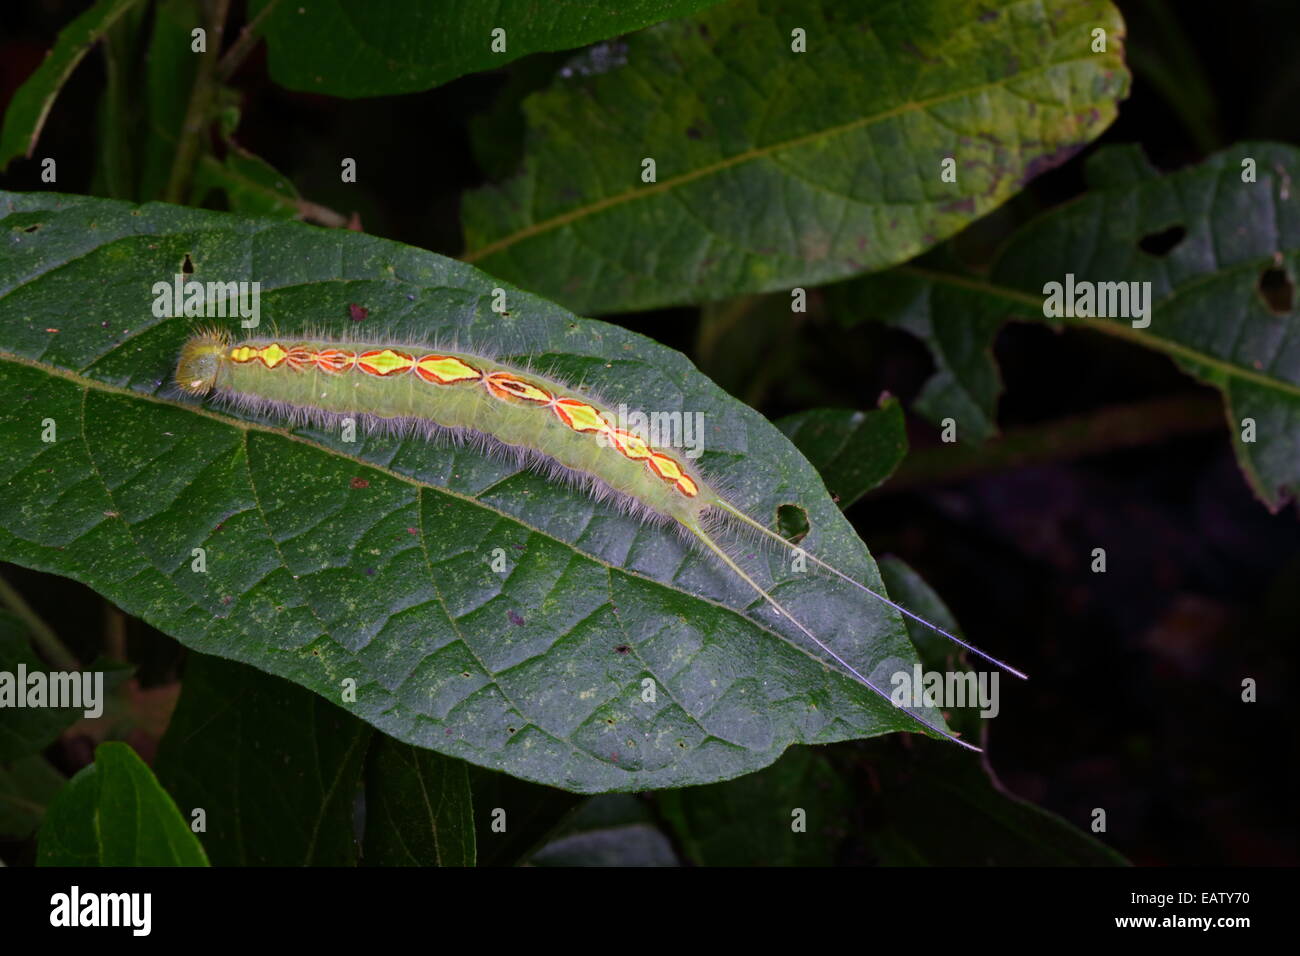 An unidentified caterpillar with long tail appendages eating a leaf. Stock Photo